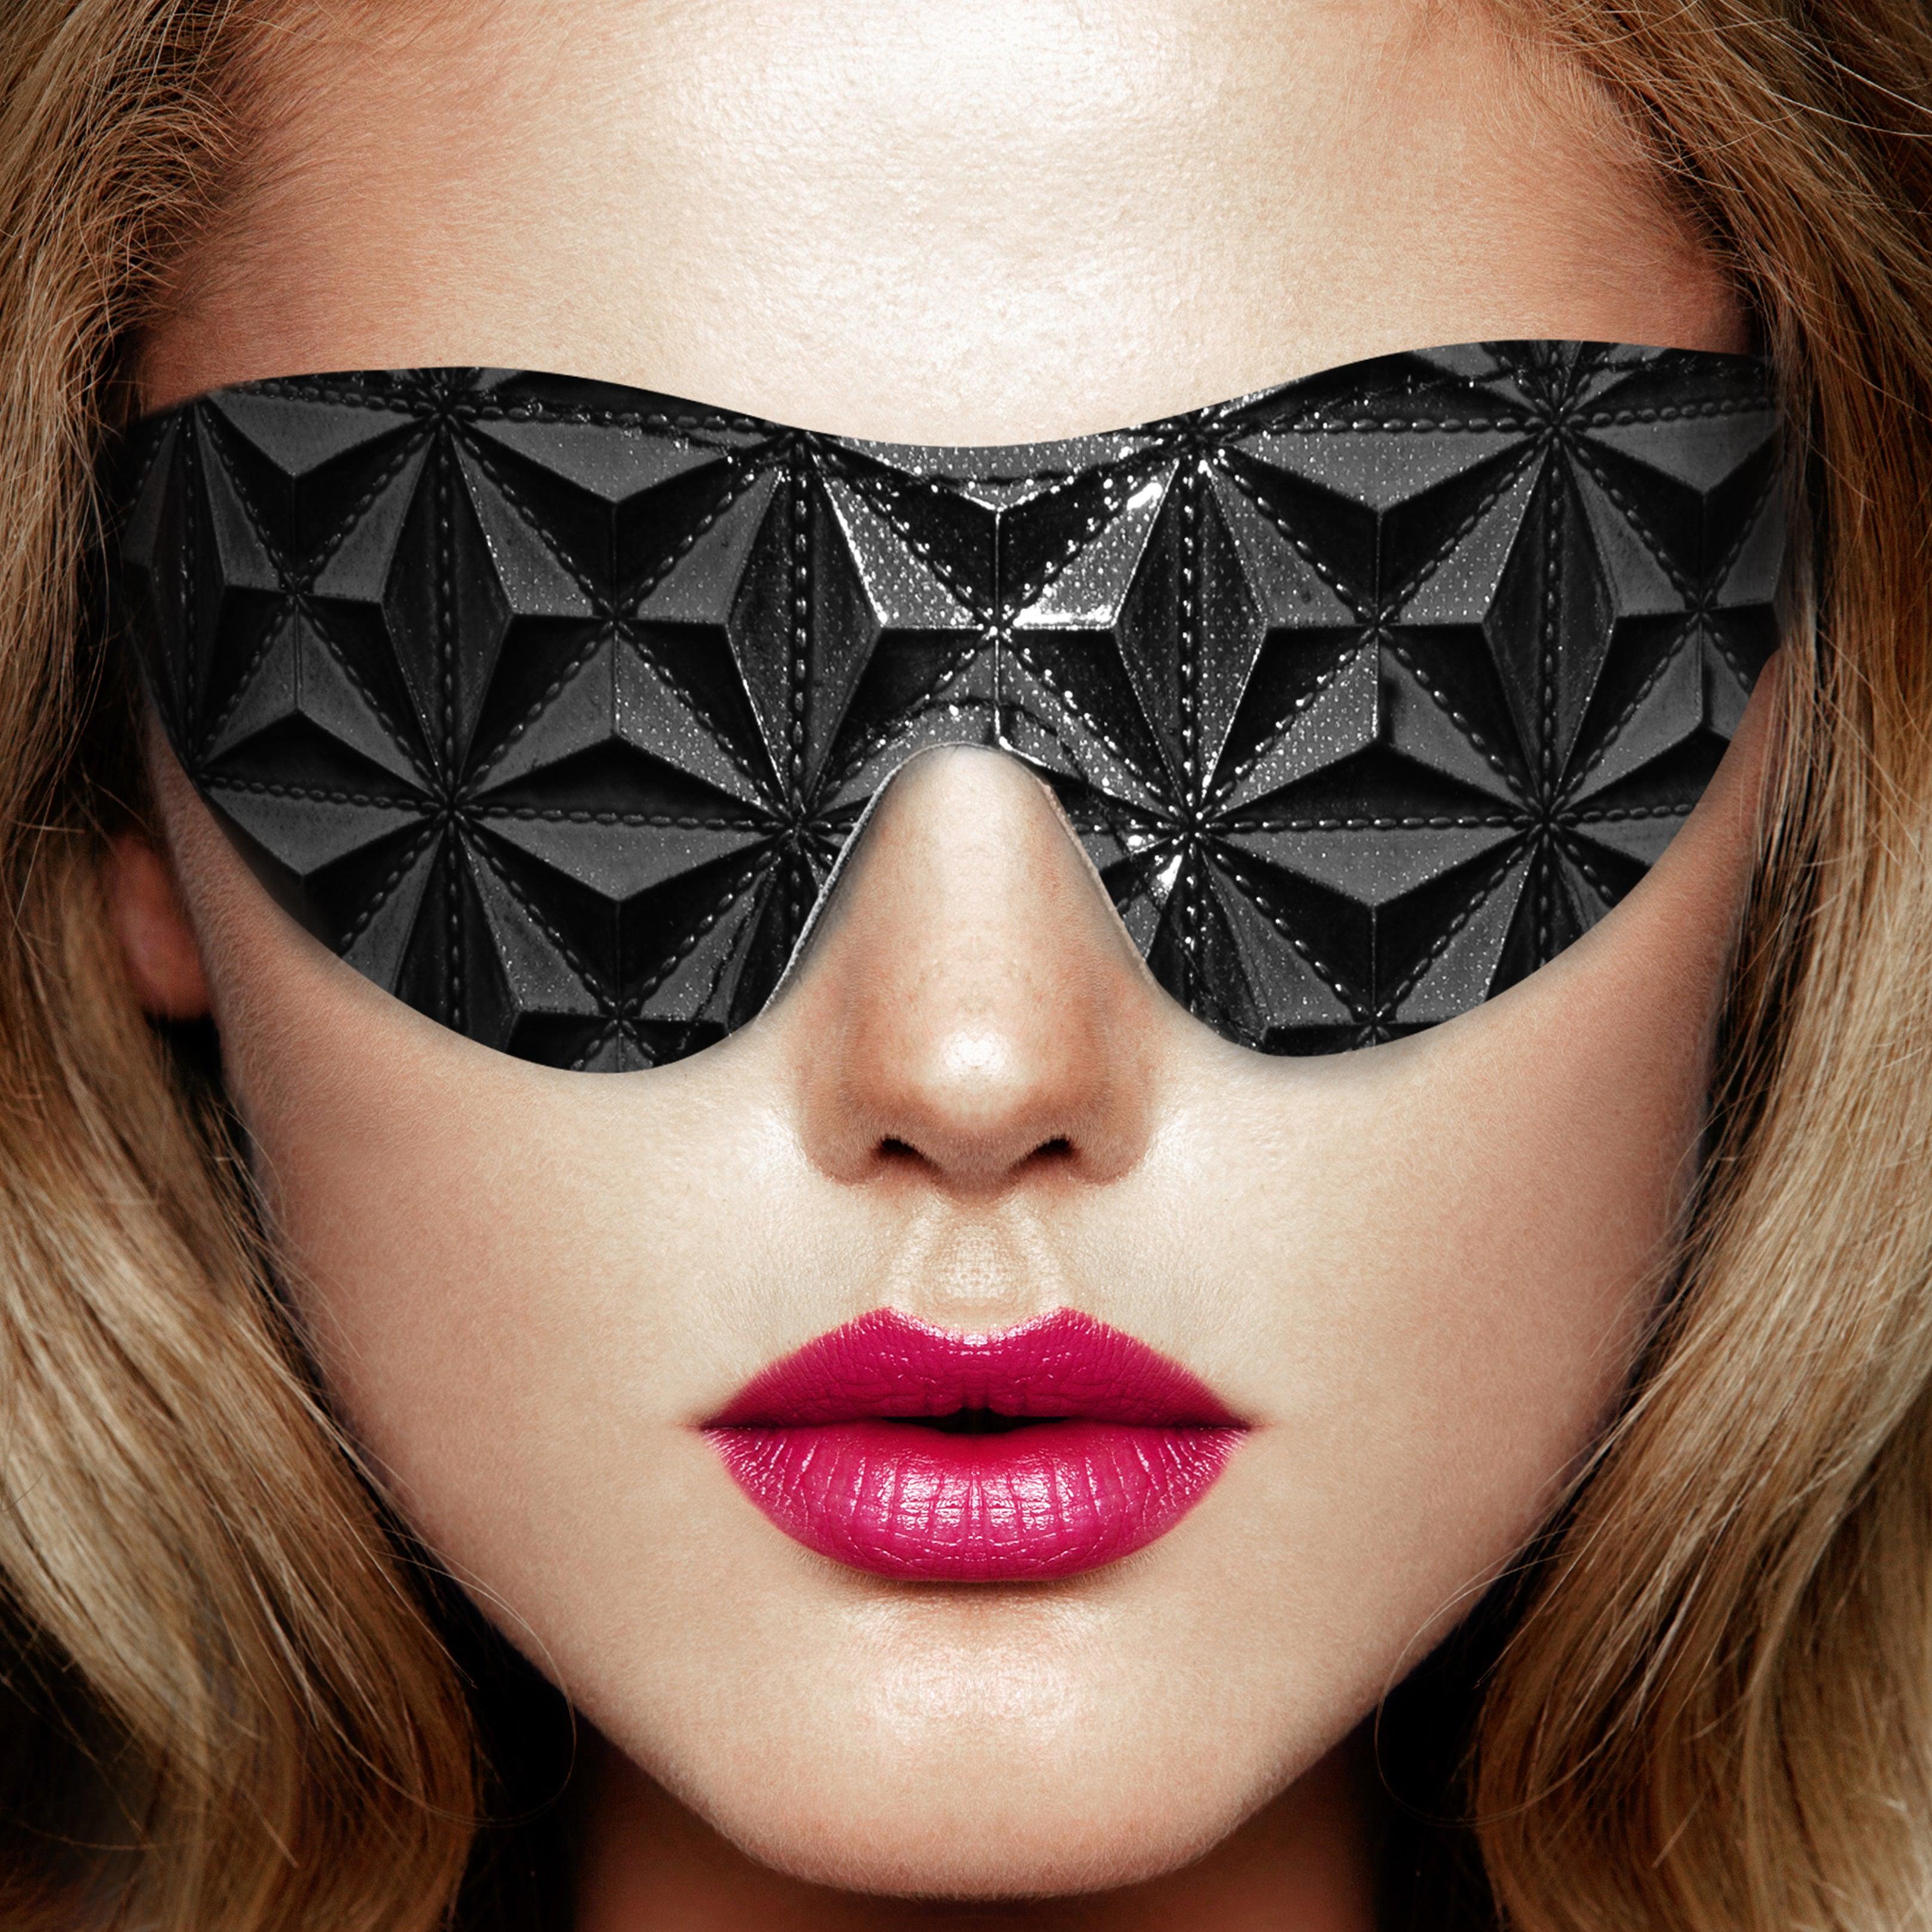 Ouch Black Luxury Eye Mask - Adult Planet - Online Sex Toys Shop UK